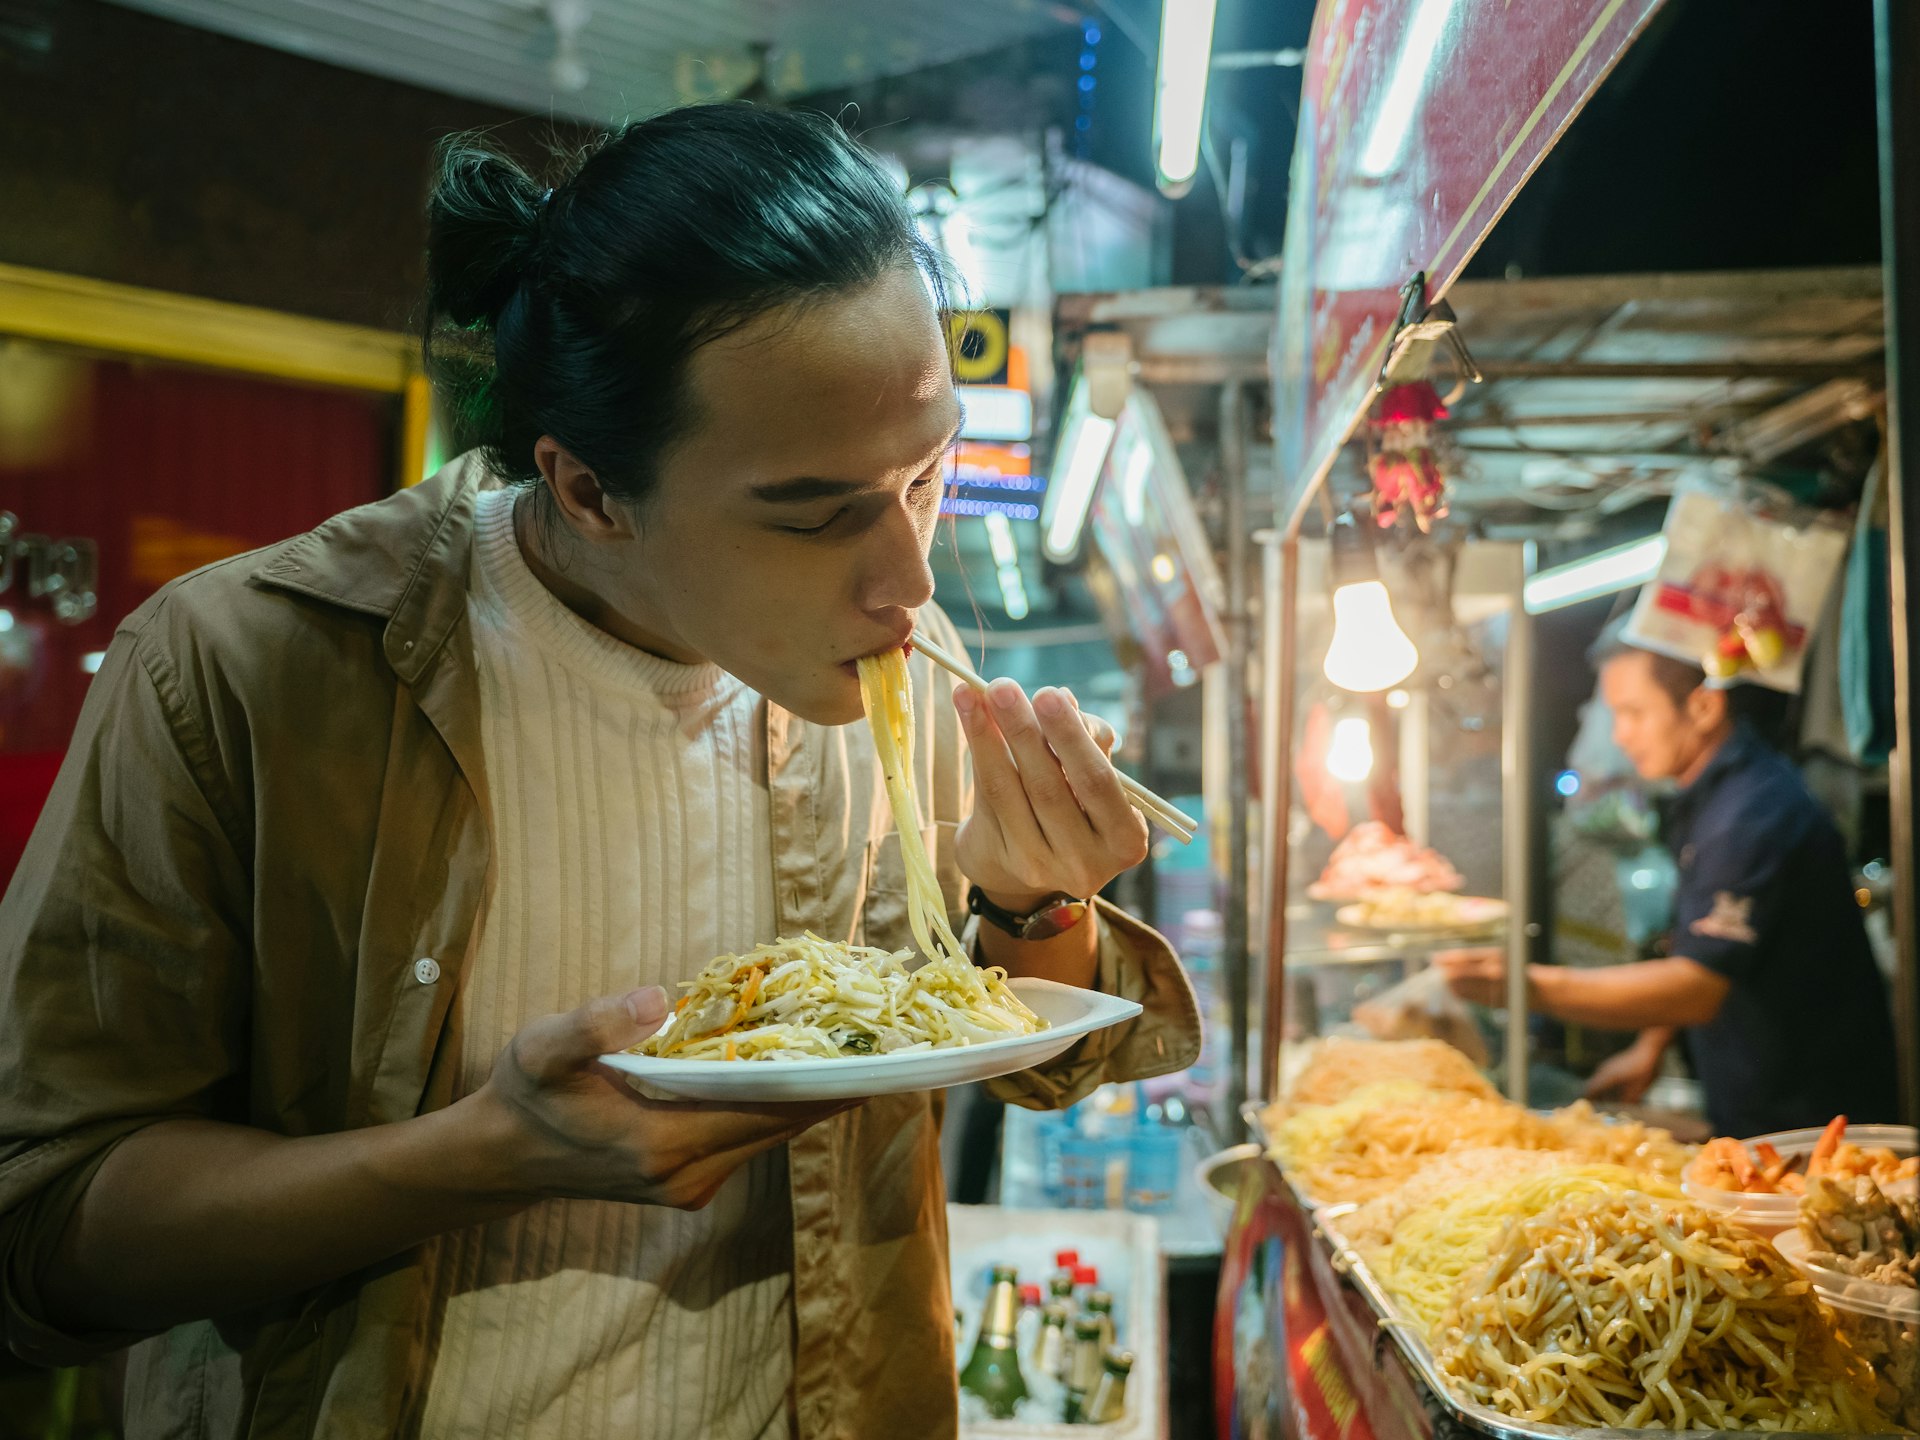 Goodwill Accor Melt What to eat and drink in Thailand - Lonely Planet